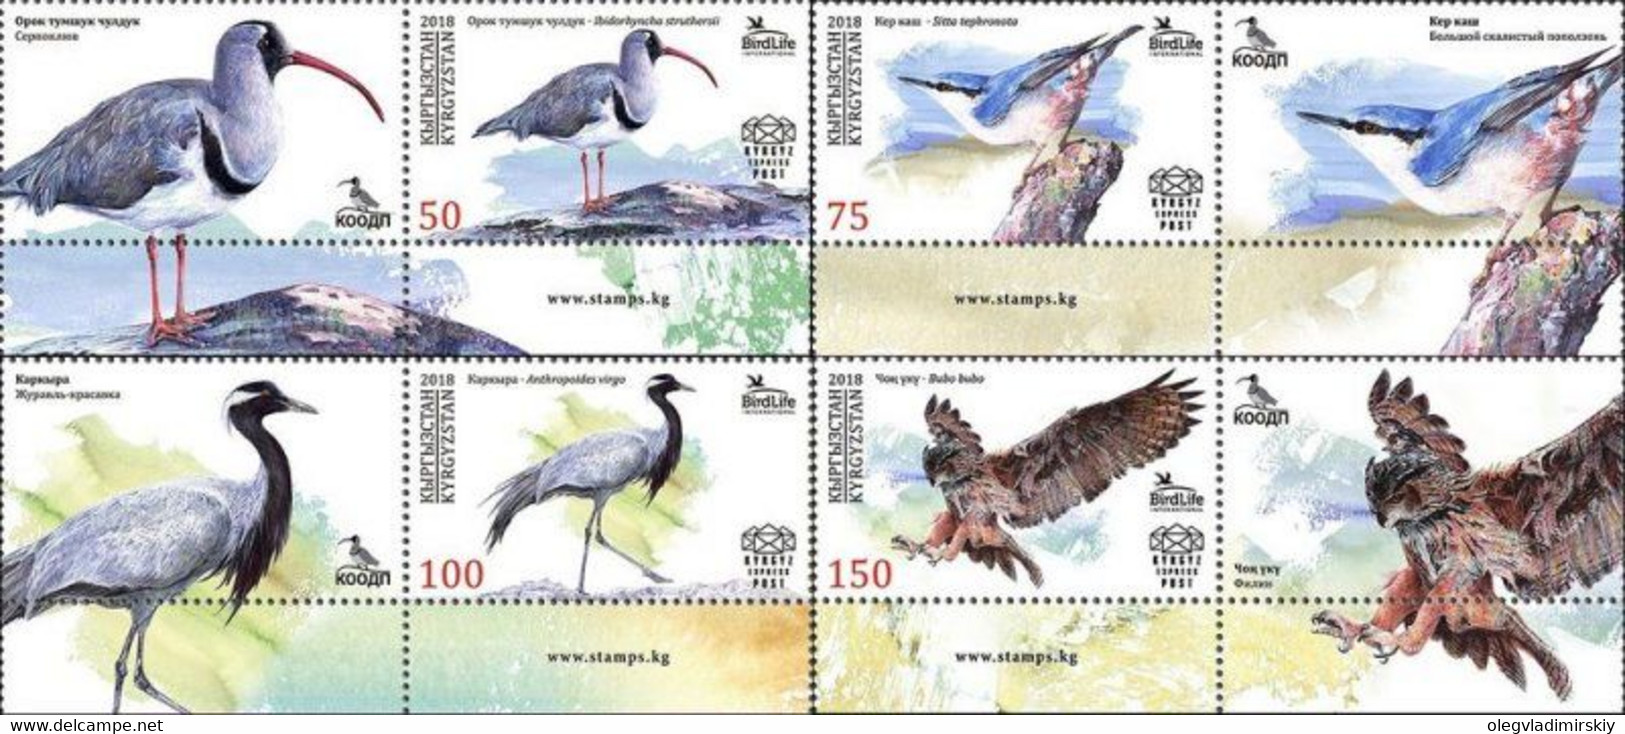 Kyrgyzstan 2018 Birds Of Kyrgyzstan Series Of 4 Stamps With Coupons - Mussen